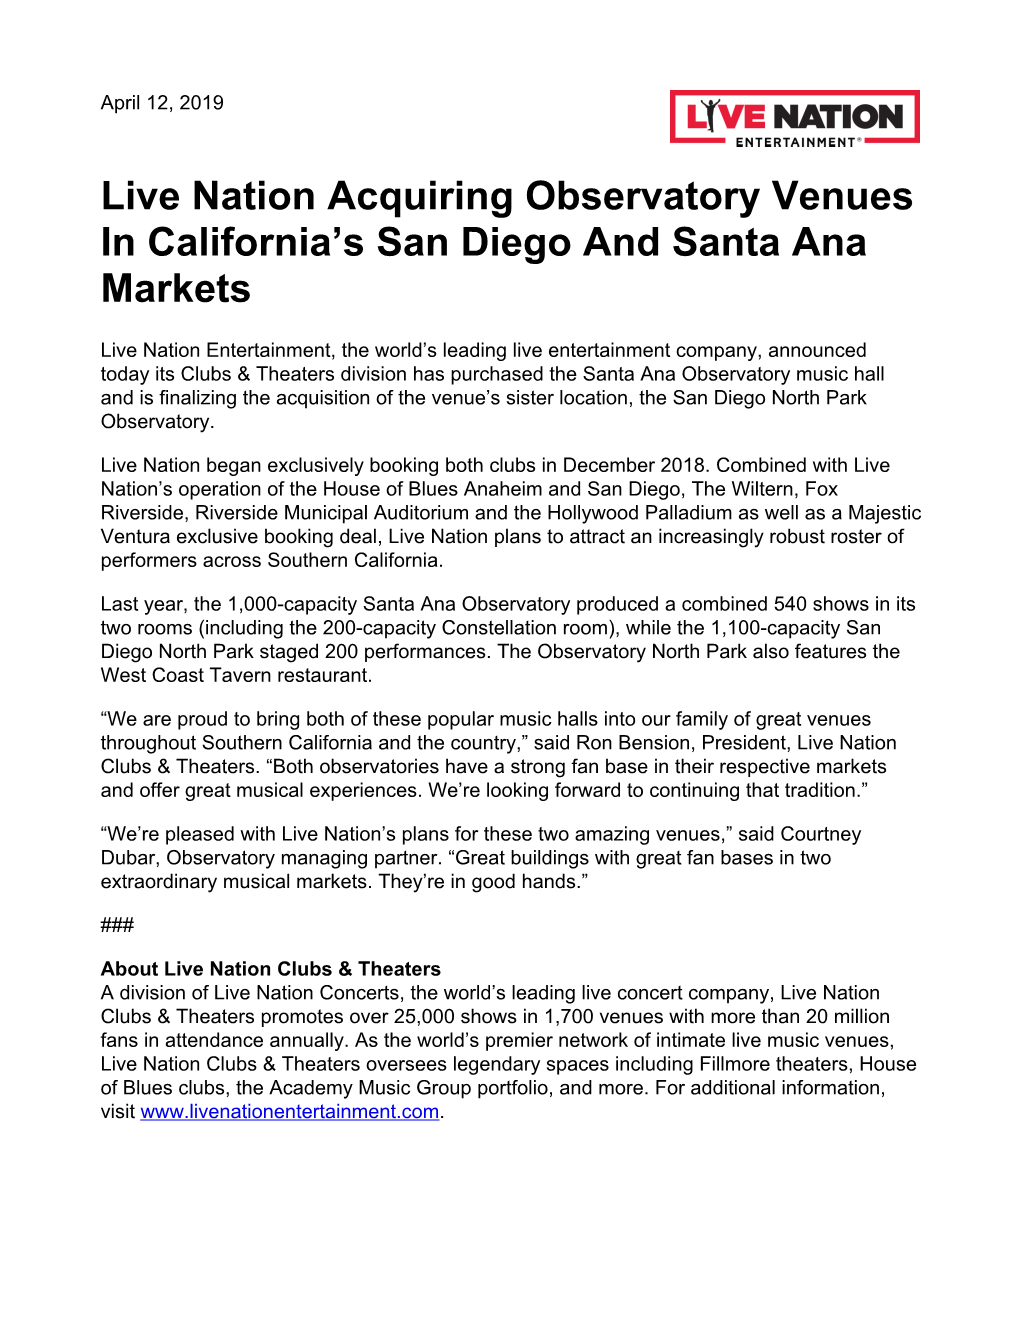 Live Nation Acquiring Observatory Venues in California's San Diego